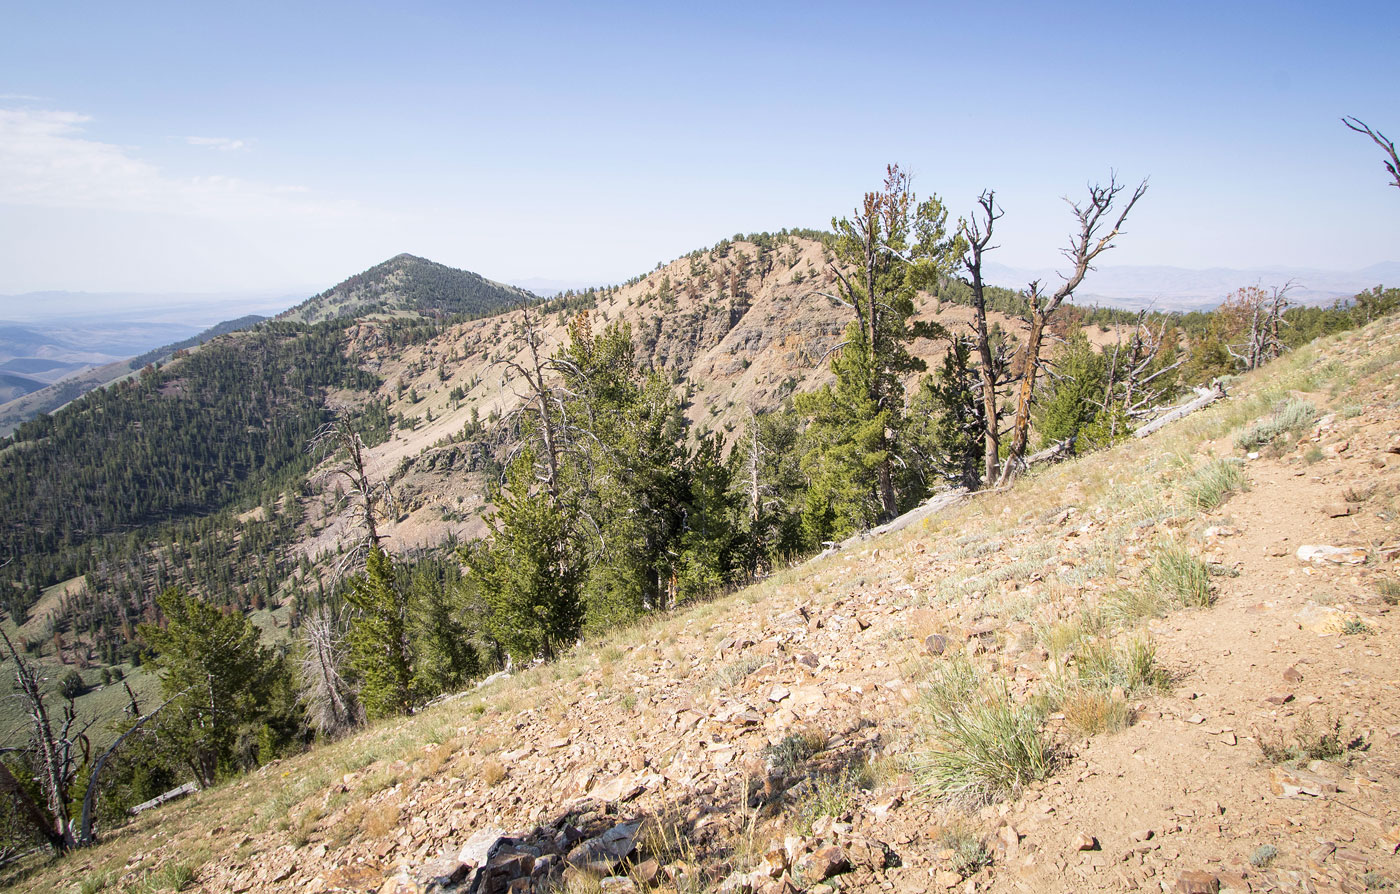 Hike Copper Mountain and Silver Mountain Loop in Humboldt-Toiyabe National Forest, Nevada - Stav is Lost